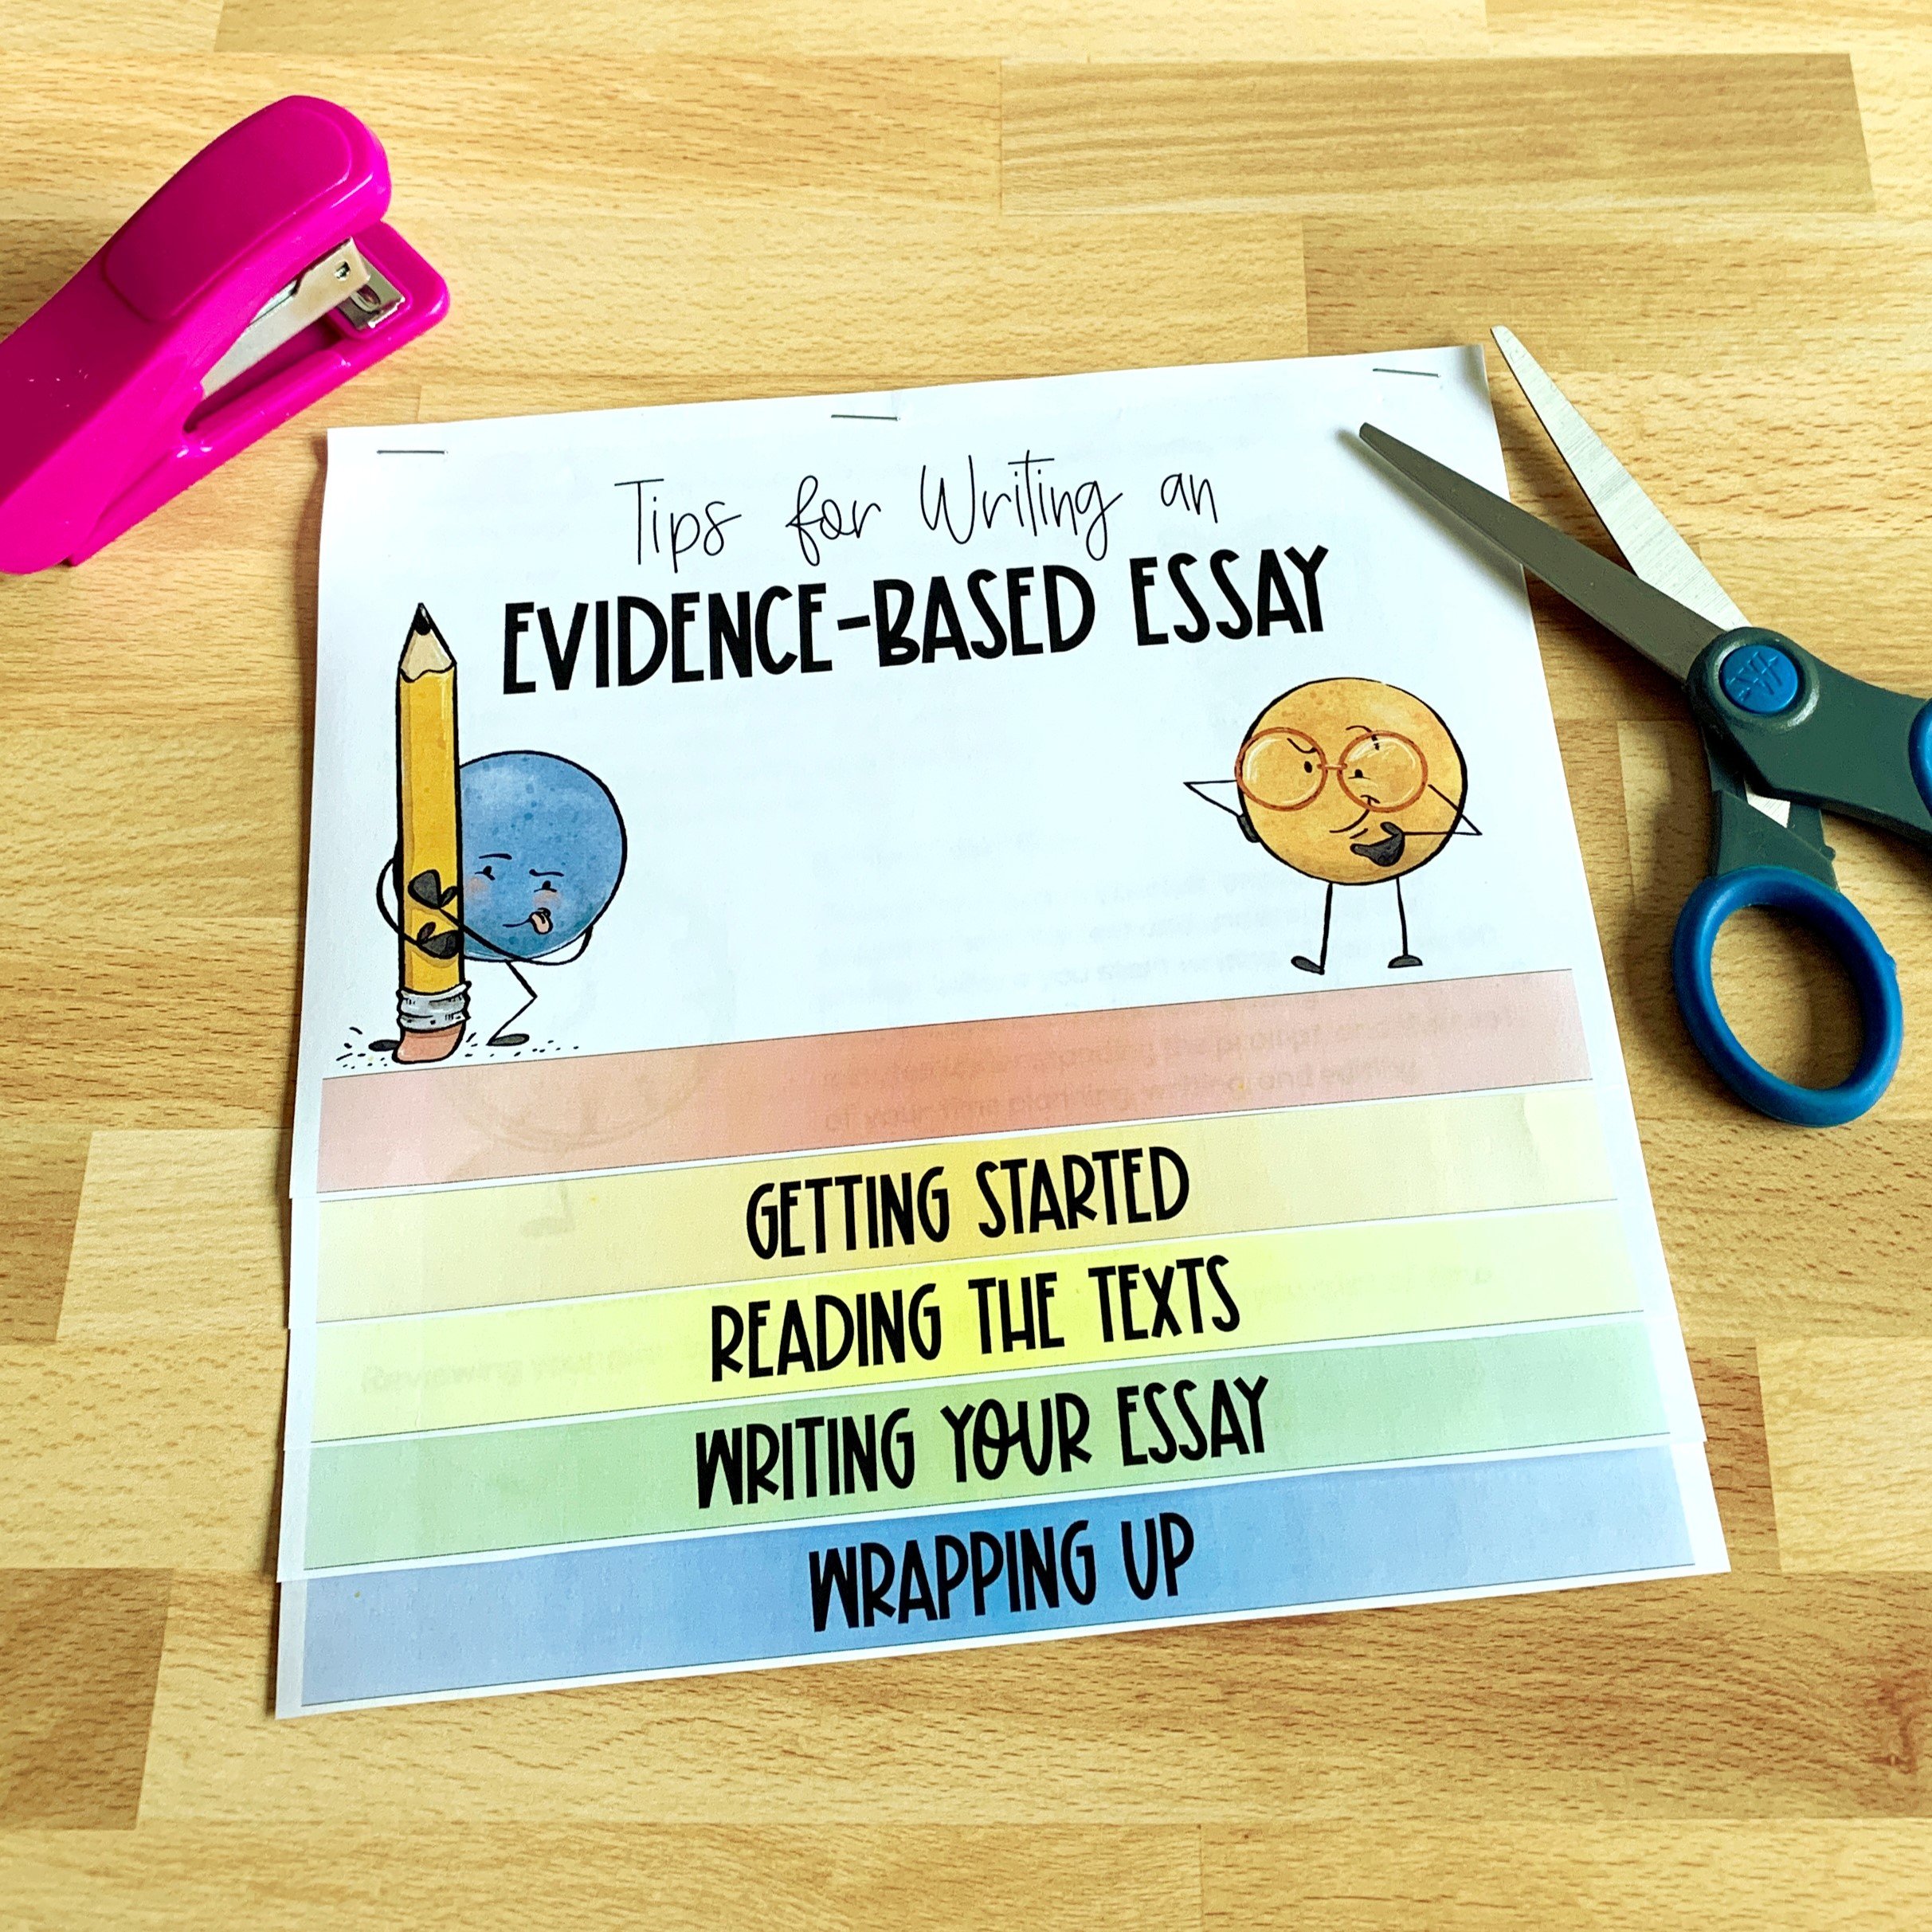 Free Flipbook on Tips for Writing an Evidence-Based Essay